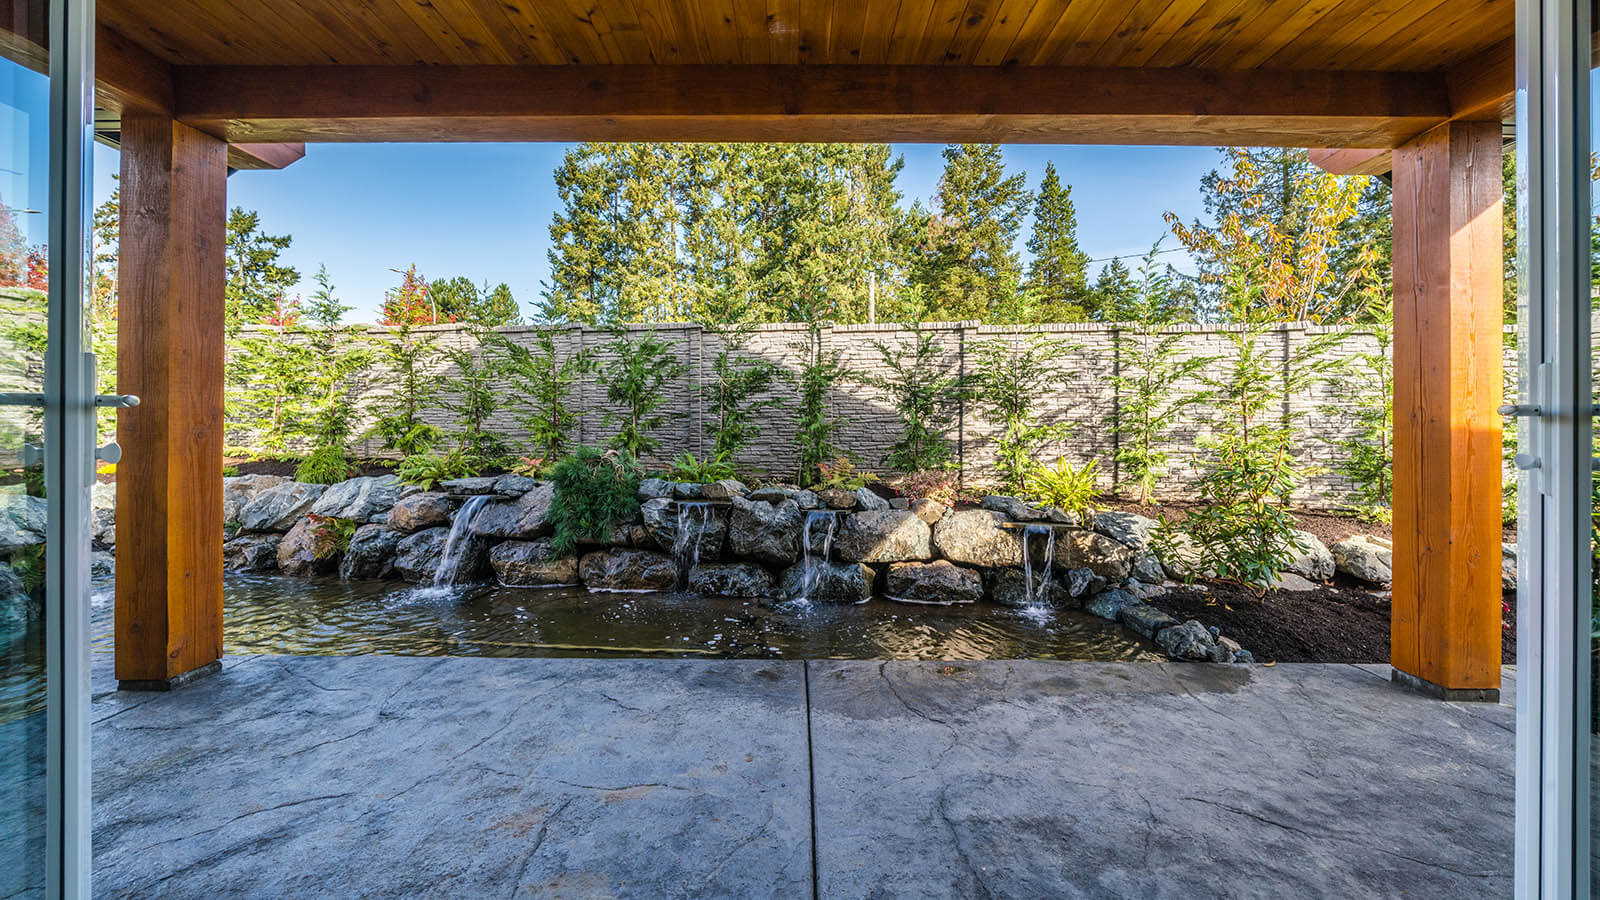 A beautiful water feature in the backyard of a home on Vancouver Island.